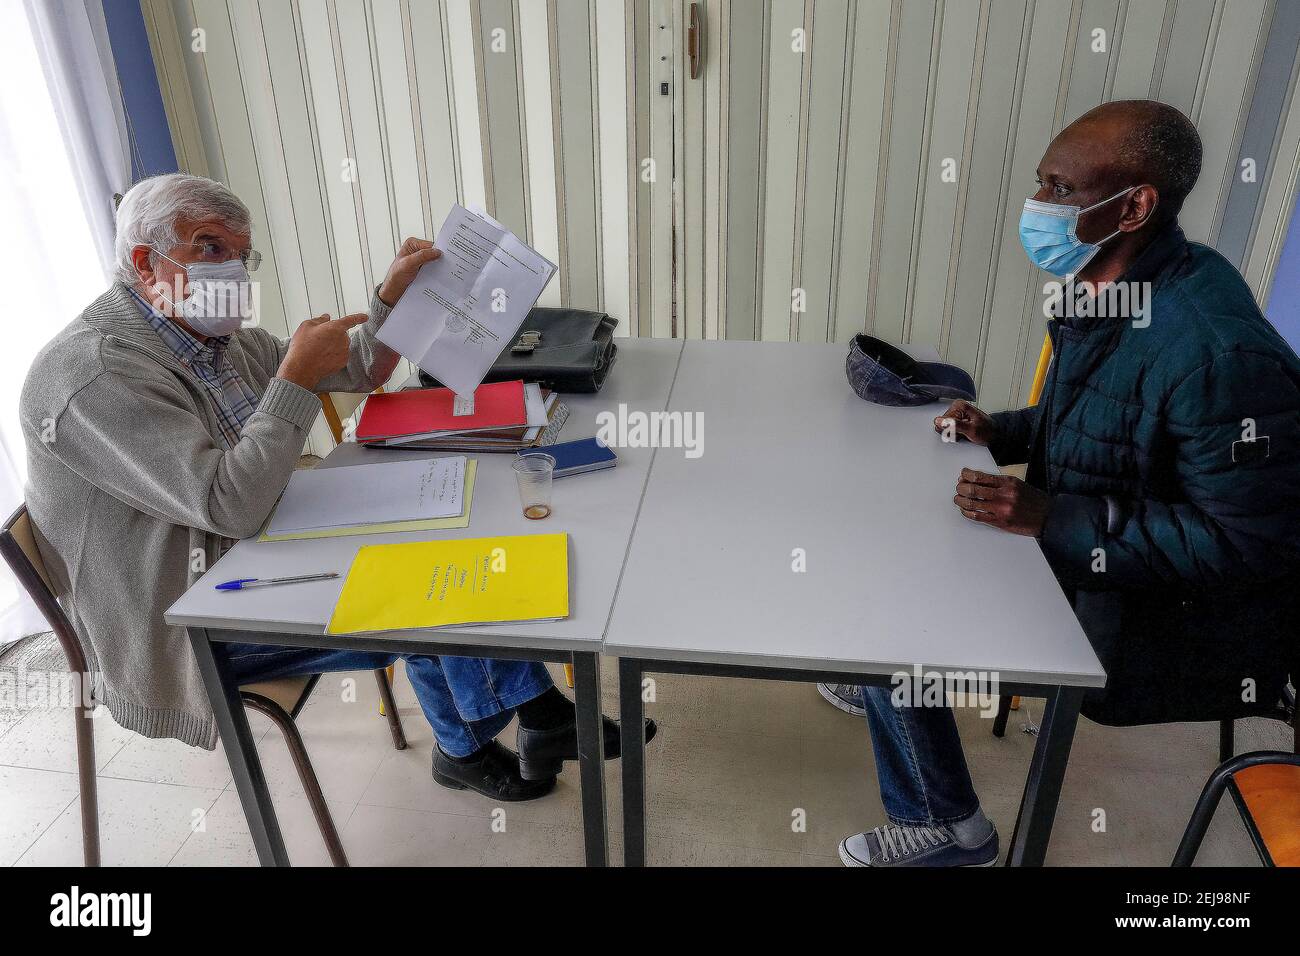 Catholic association helping migrants with administrative matters in vernon, france Stock Photo